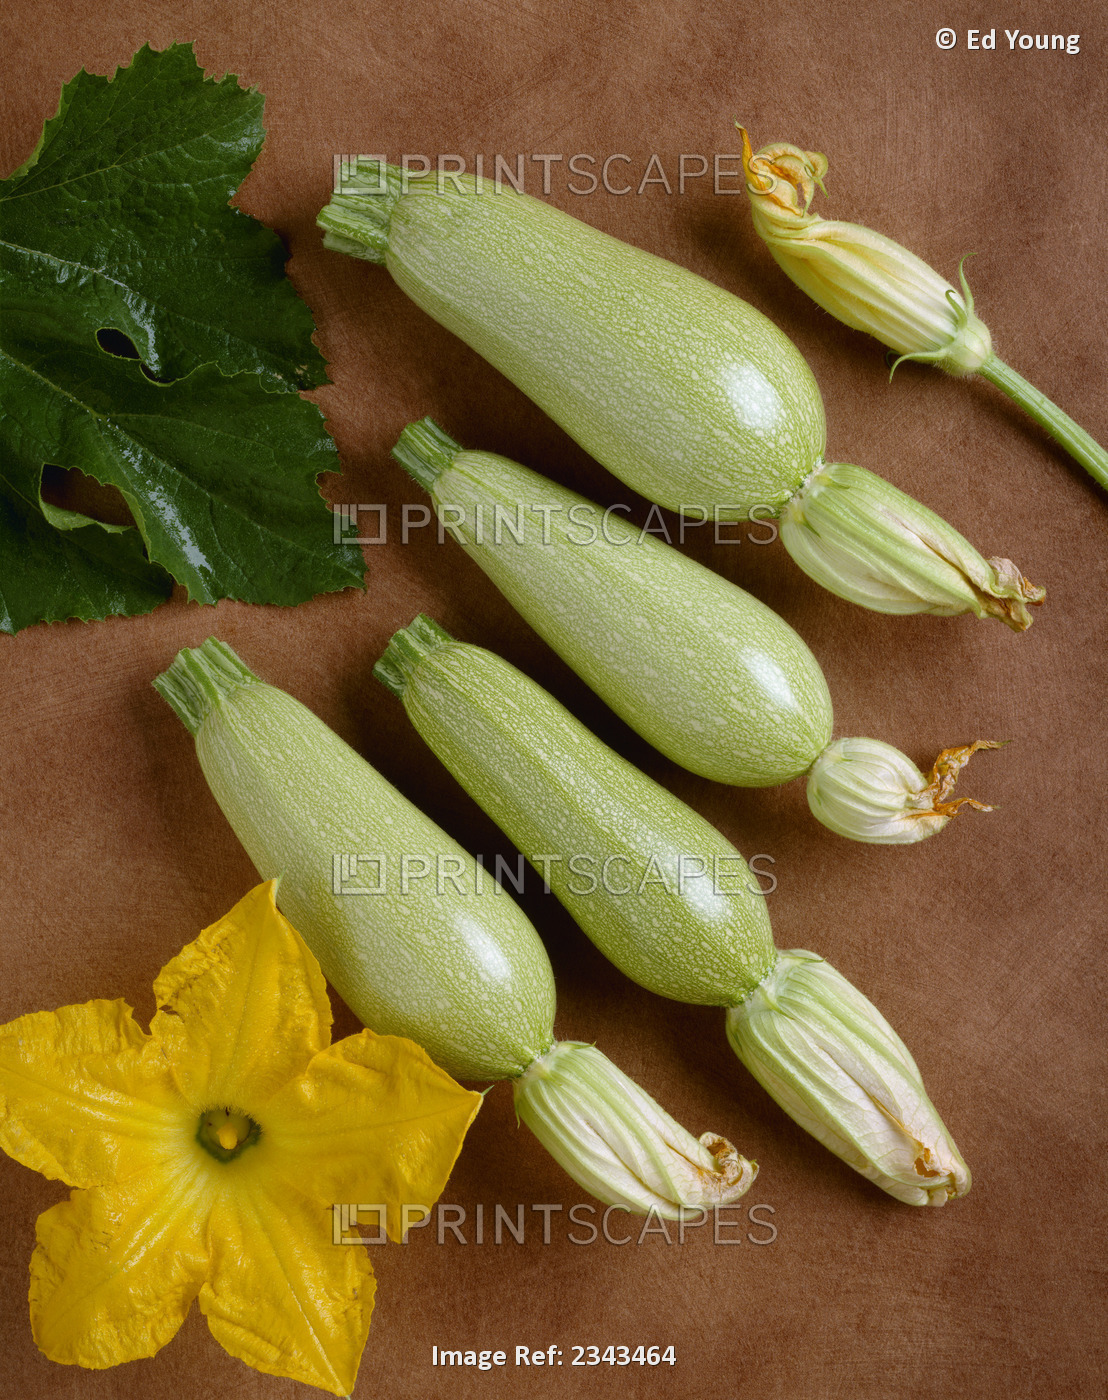 Agriculture - Grey Zucchini On A Copper Surface; Variety Anita Type, Studio.